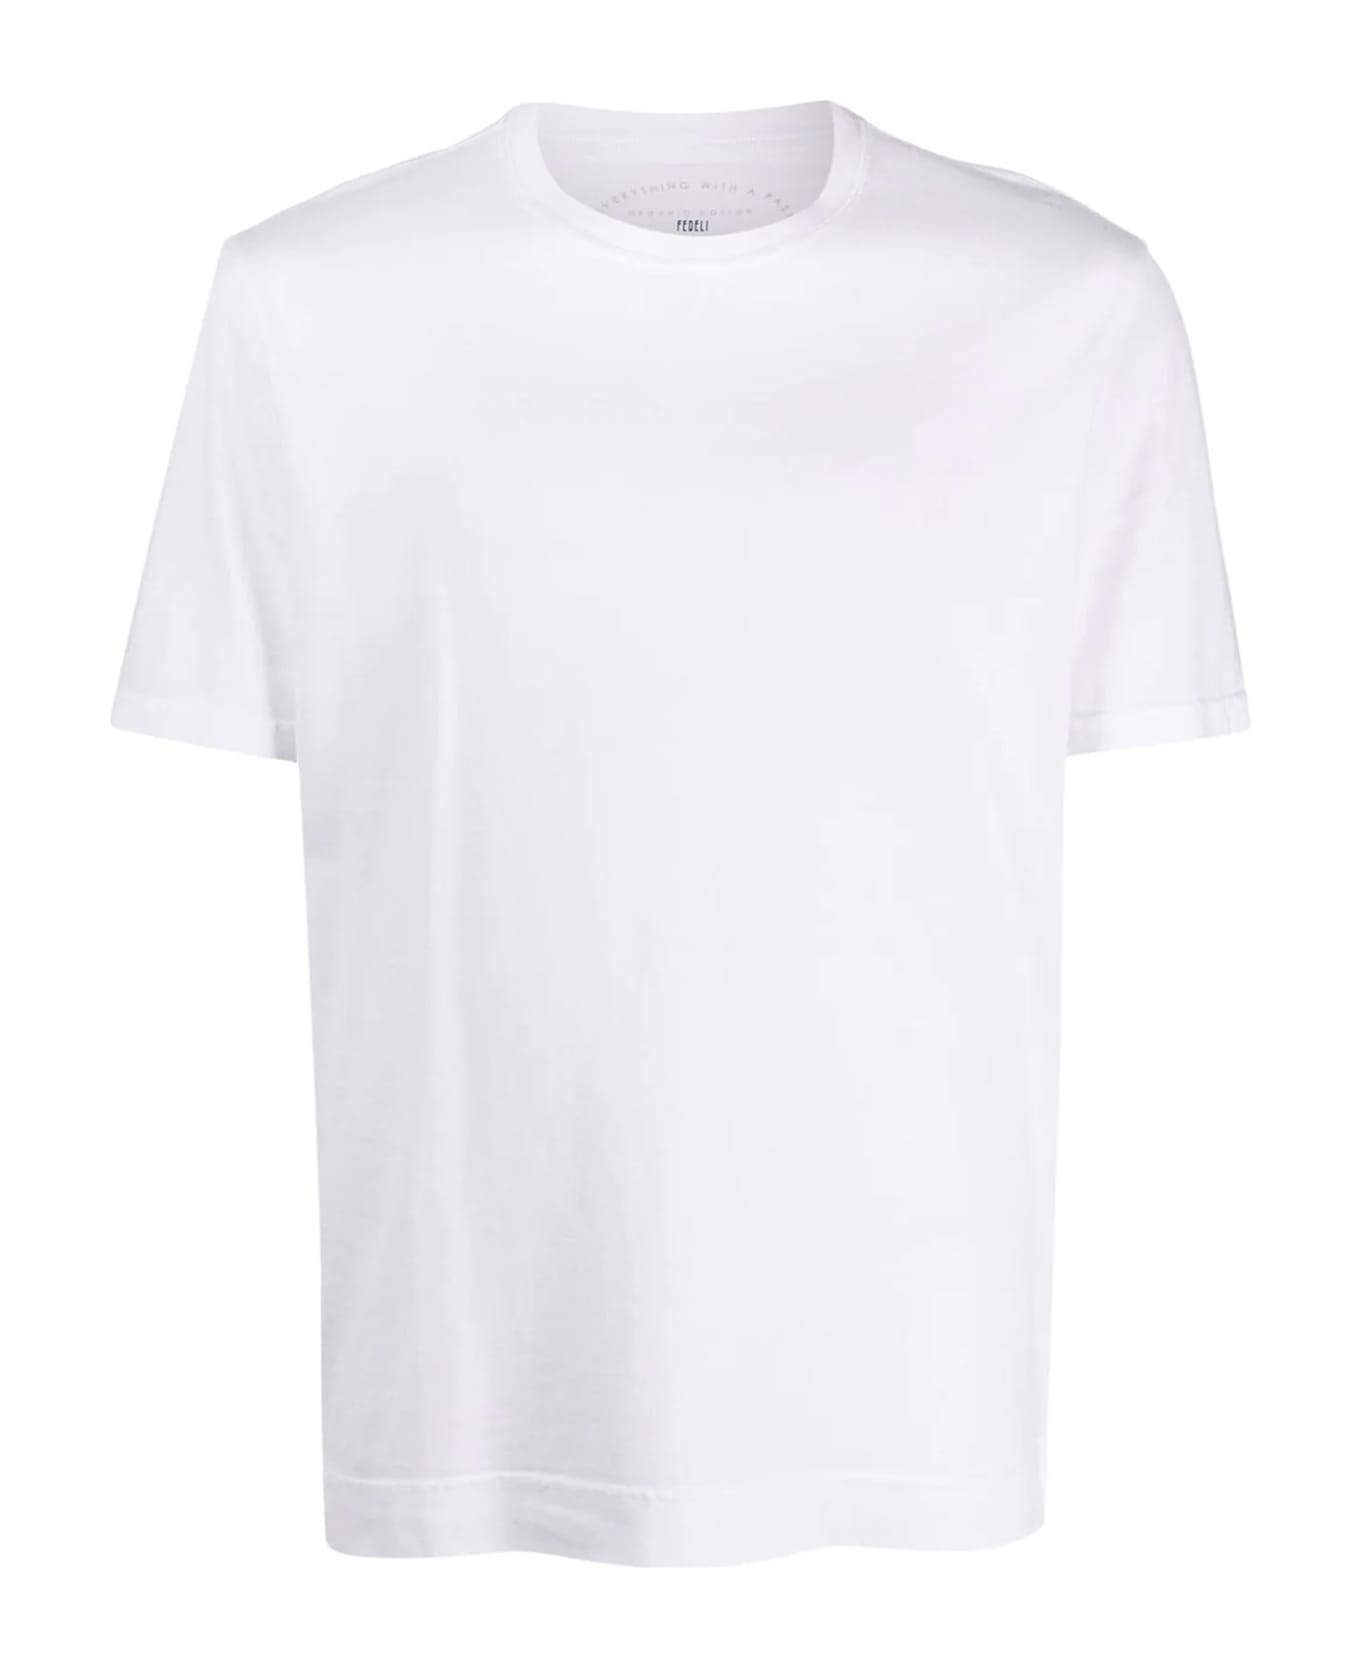 Fedeli Extreme Organic Cotton Jersey T-shirt | italist, ALWAYS LIKE A SALE